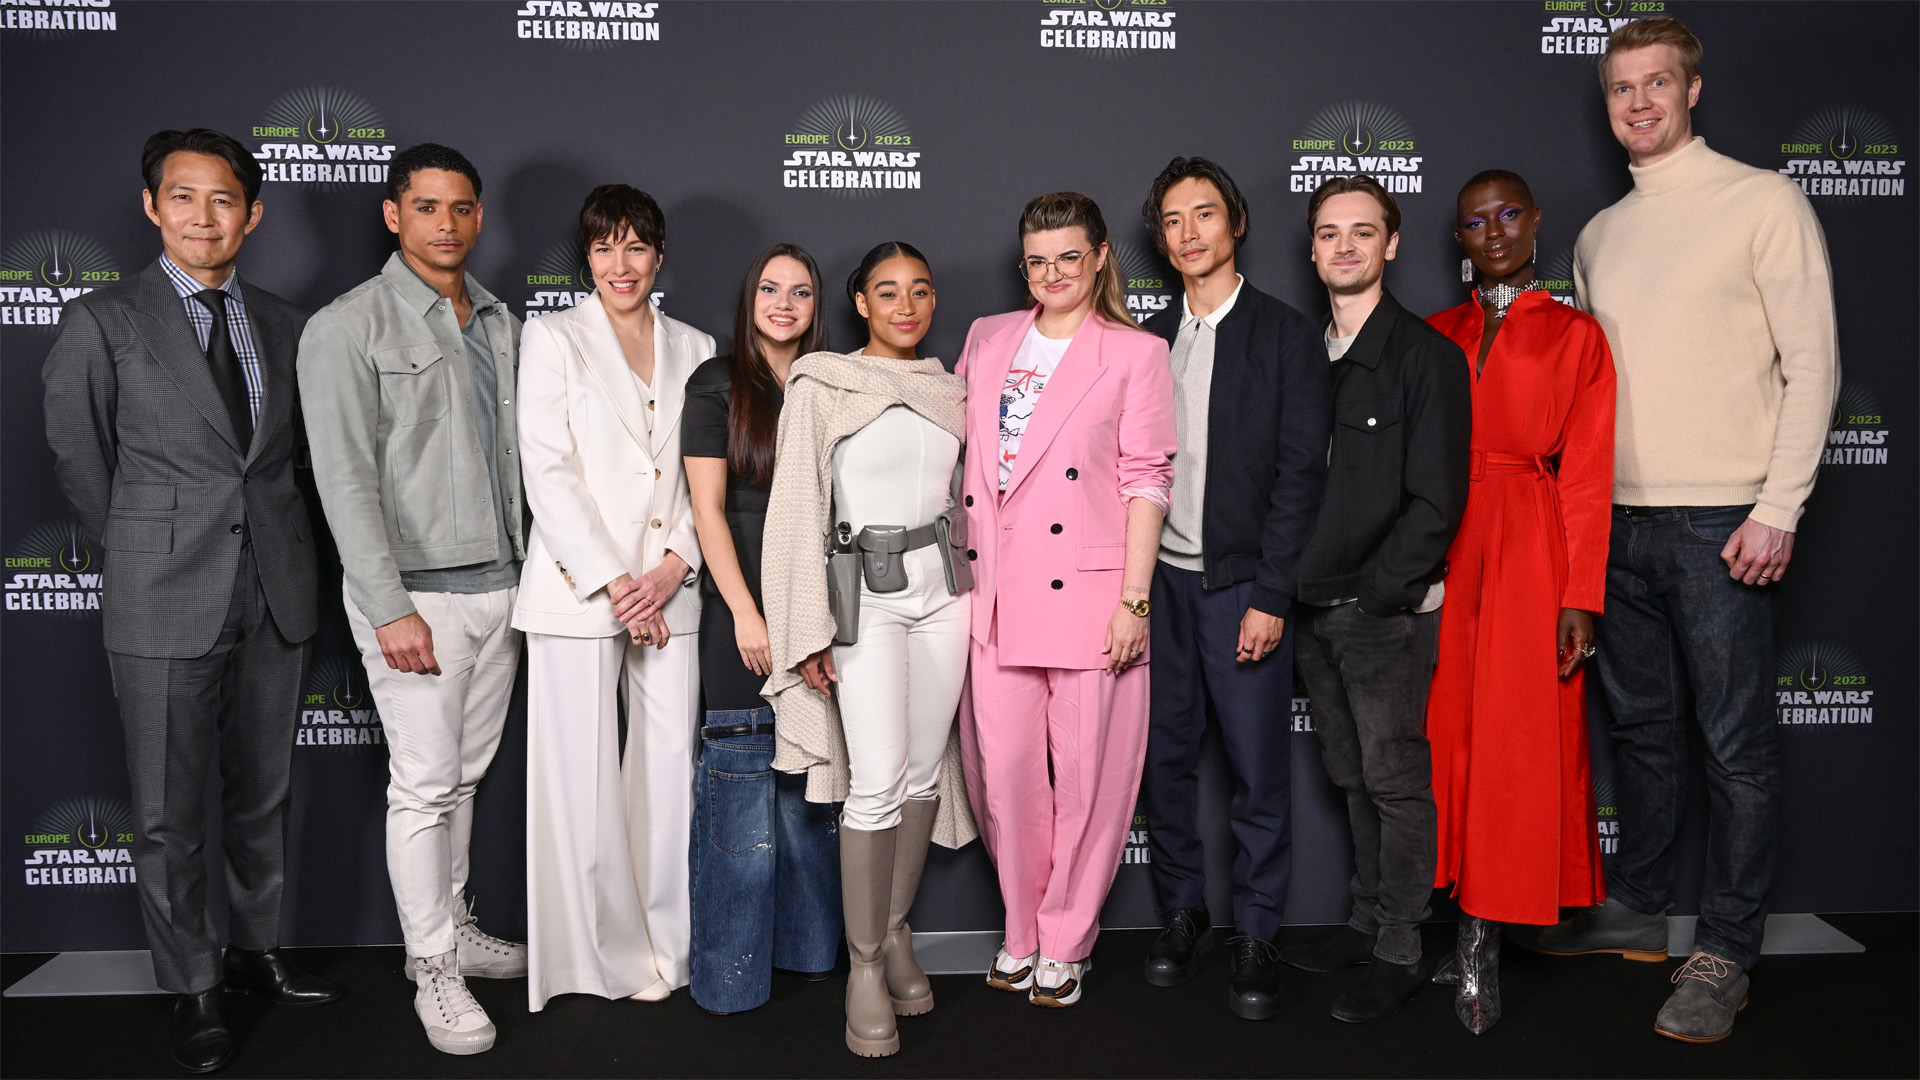 The cast of The Acolyte at Star Wars Celebration 2023